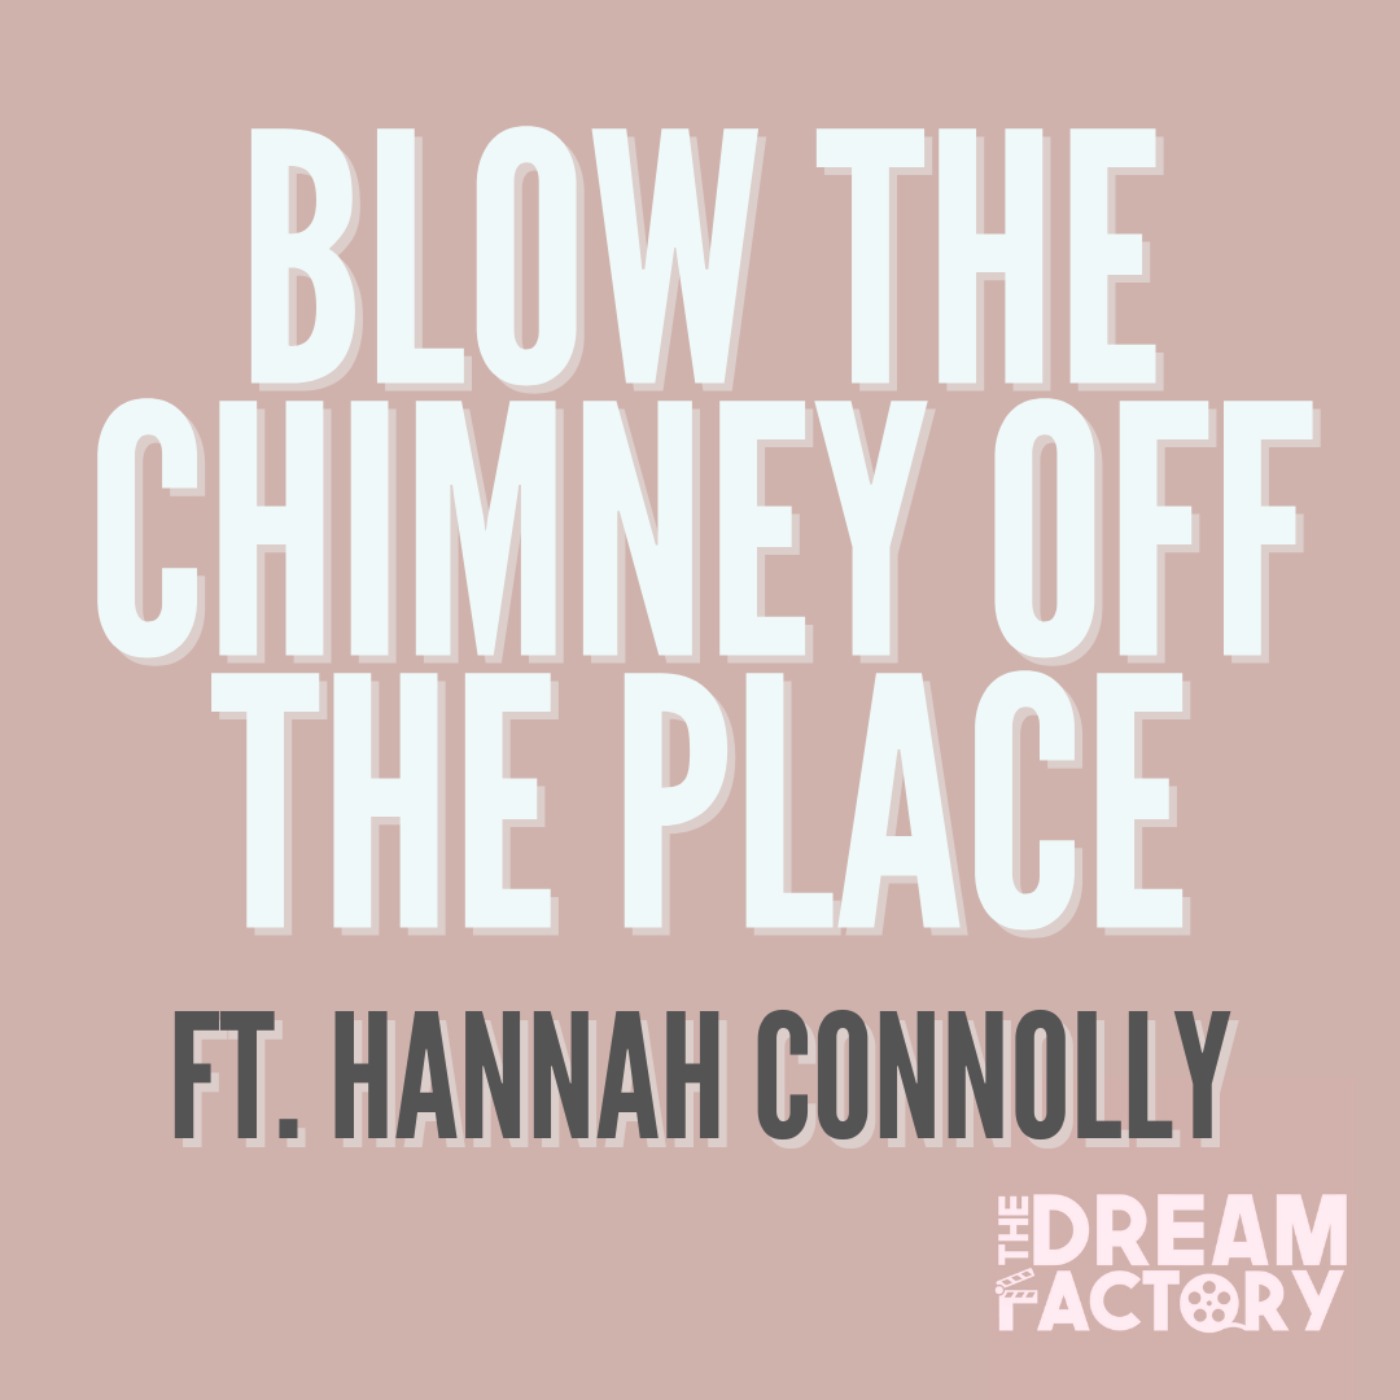 Blow The Chimney Off The Place FT. Hannah Connolly